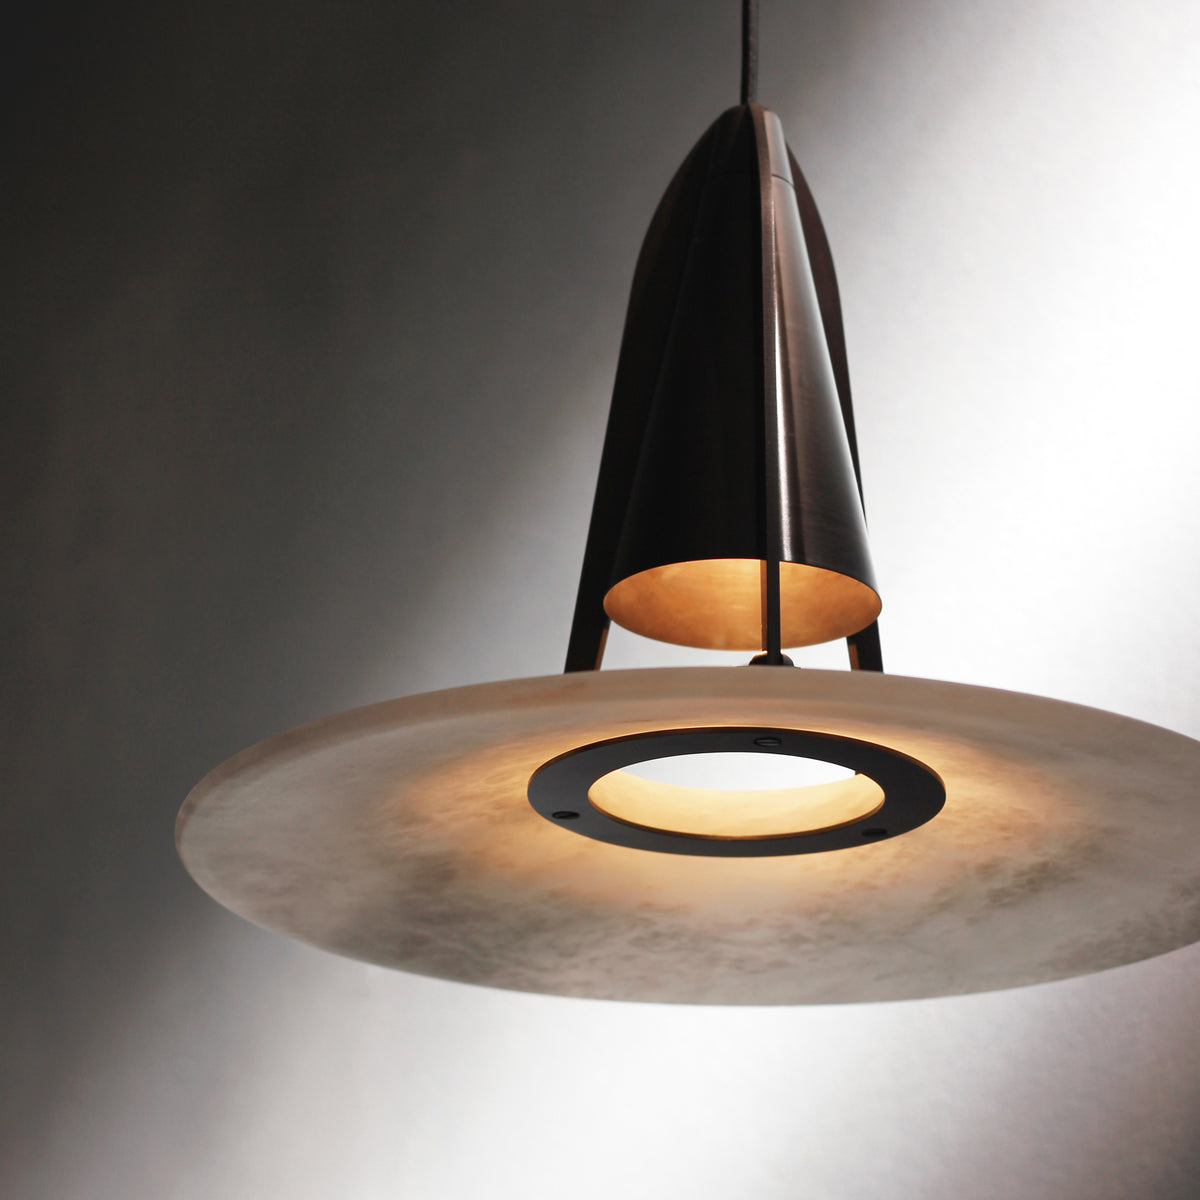 Aragon Pendant Light with alabaster stone shade and bronze metalwork